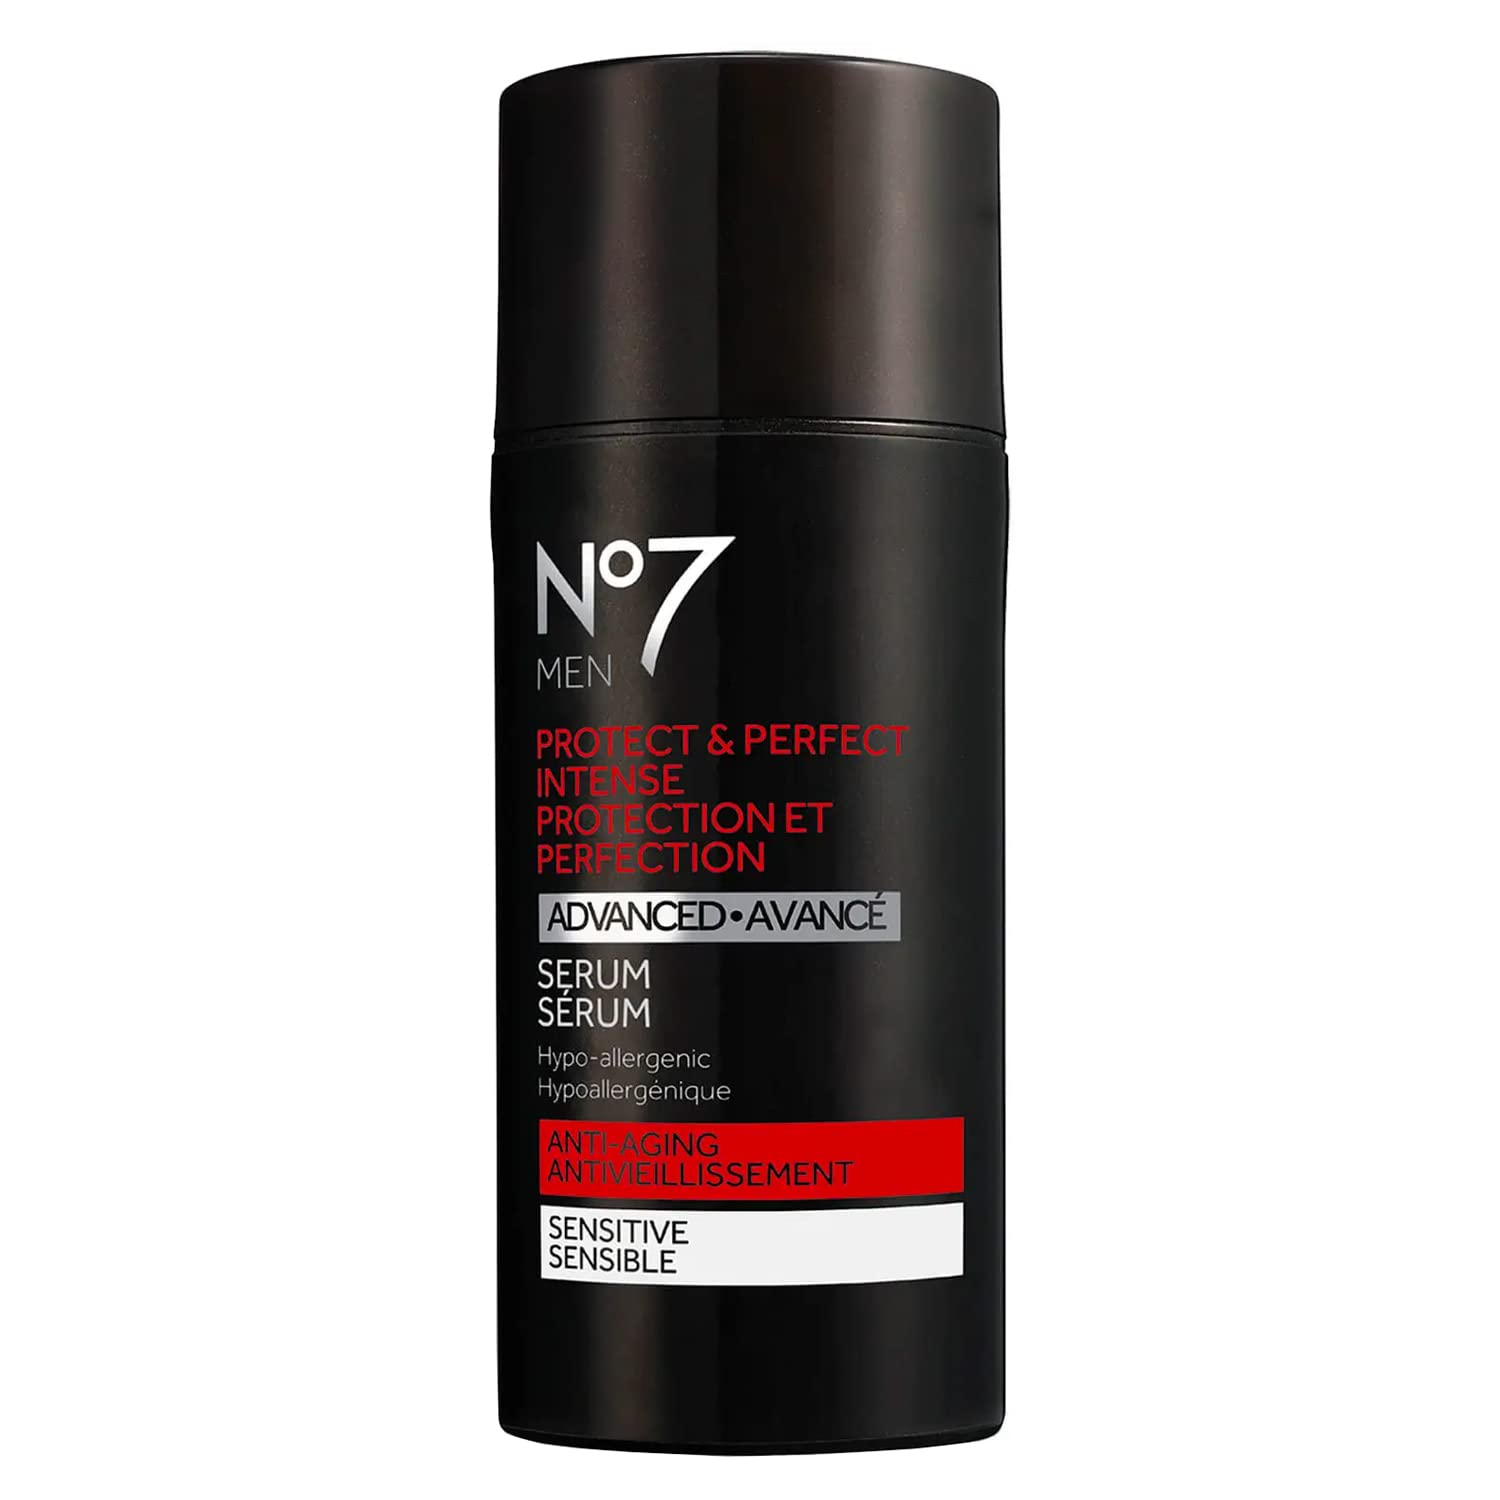 No7 Men Protect & Perfect Intense Advanced Serum - Anti Aging Face Serum for Men - Contains Retinol to Treat Fine Lines & Wrinkles - Skin Firming + Moisturizing Skin Care for Men (30 )